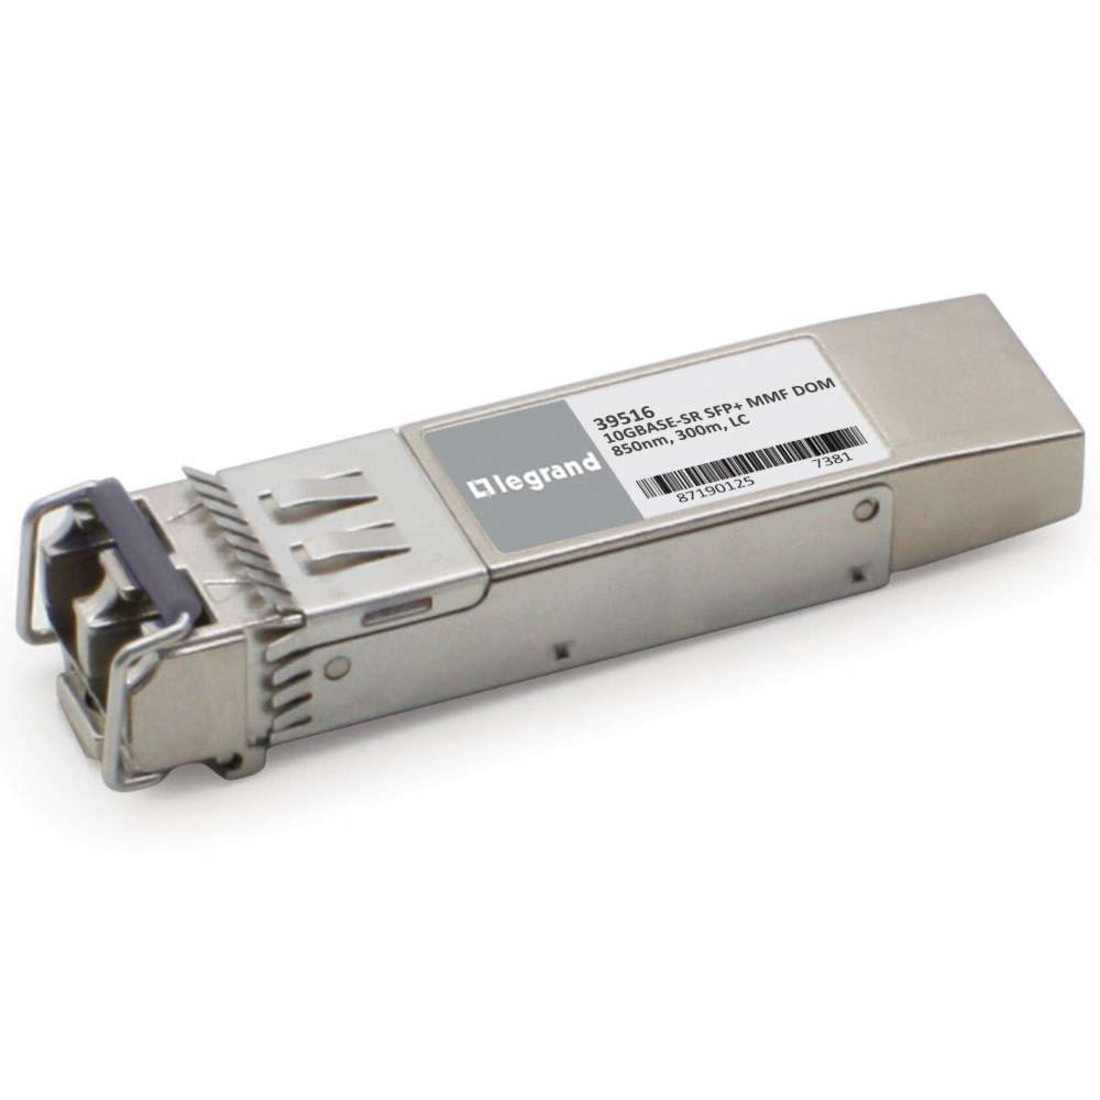 C2G HP 455883-B21 Compatible 10GBase-SR MMF SFP+ Transceiver ModuleFor Optical Network, Data Networking1 x LC 10GBase-SR NetworkOptical F… 39461